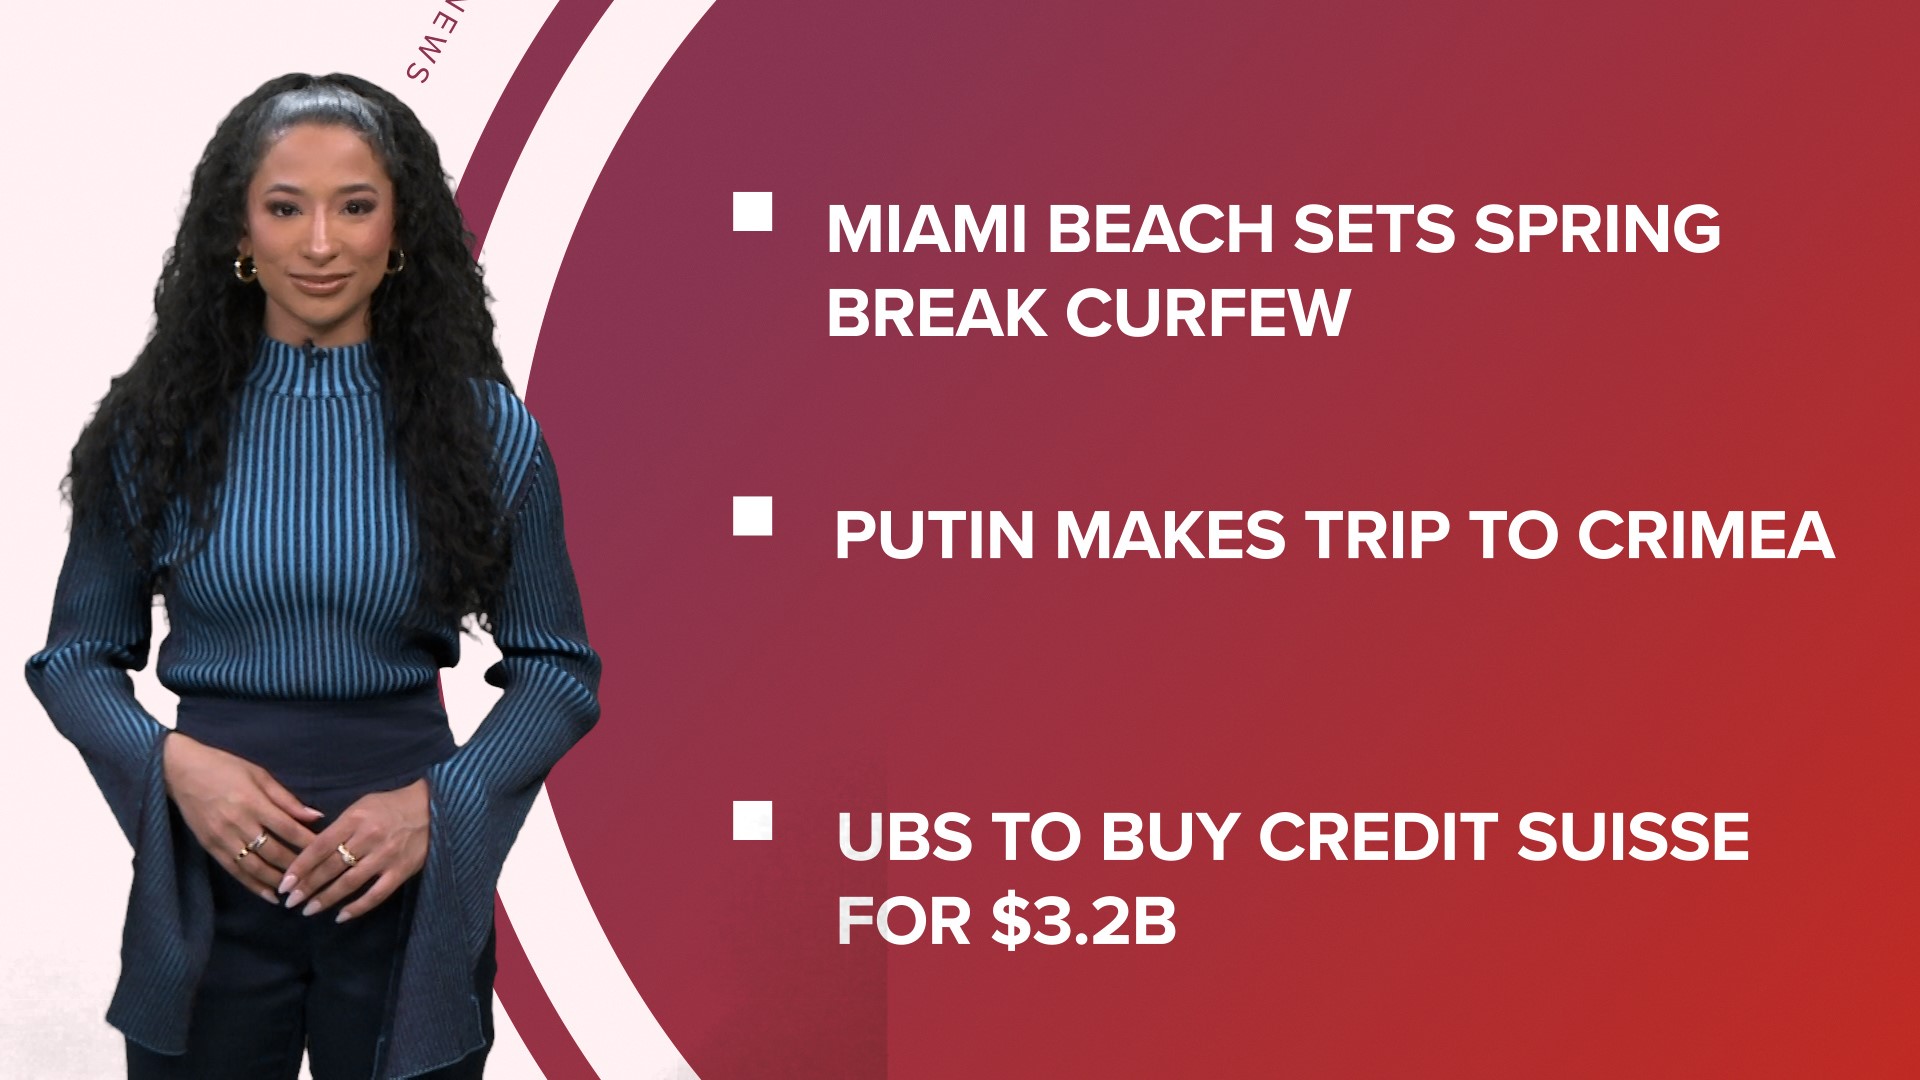 A look at what is happening in the news from USB paying Credit Suisse to Miami Beach implementing a spring break curfew and verifying March Madness claims.